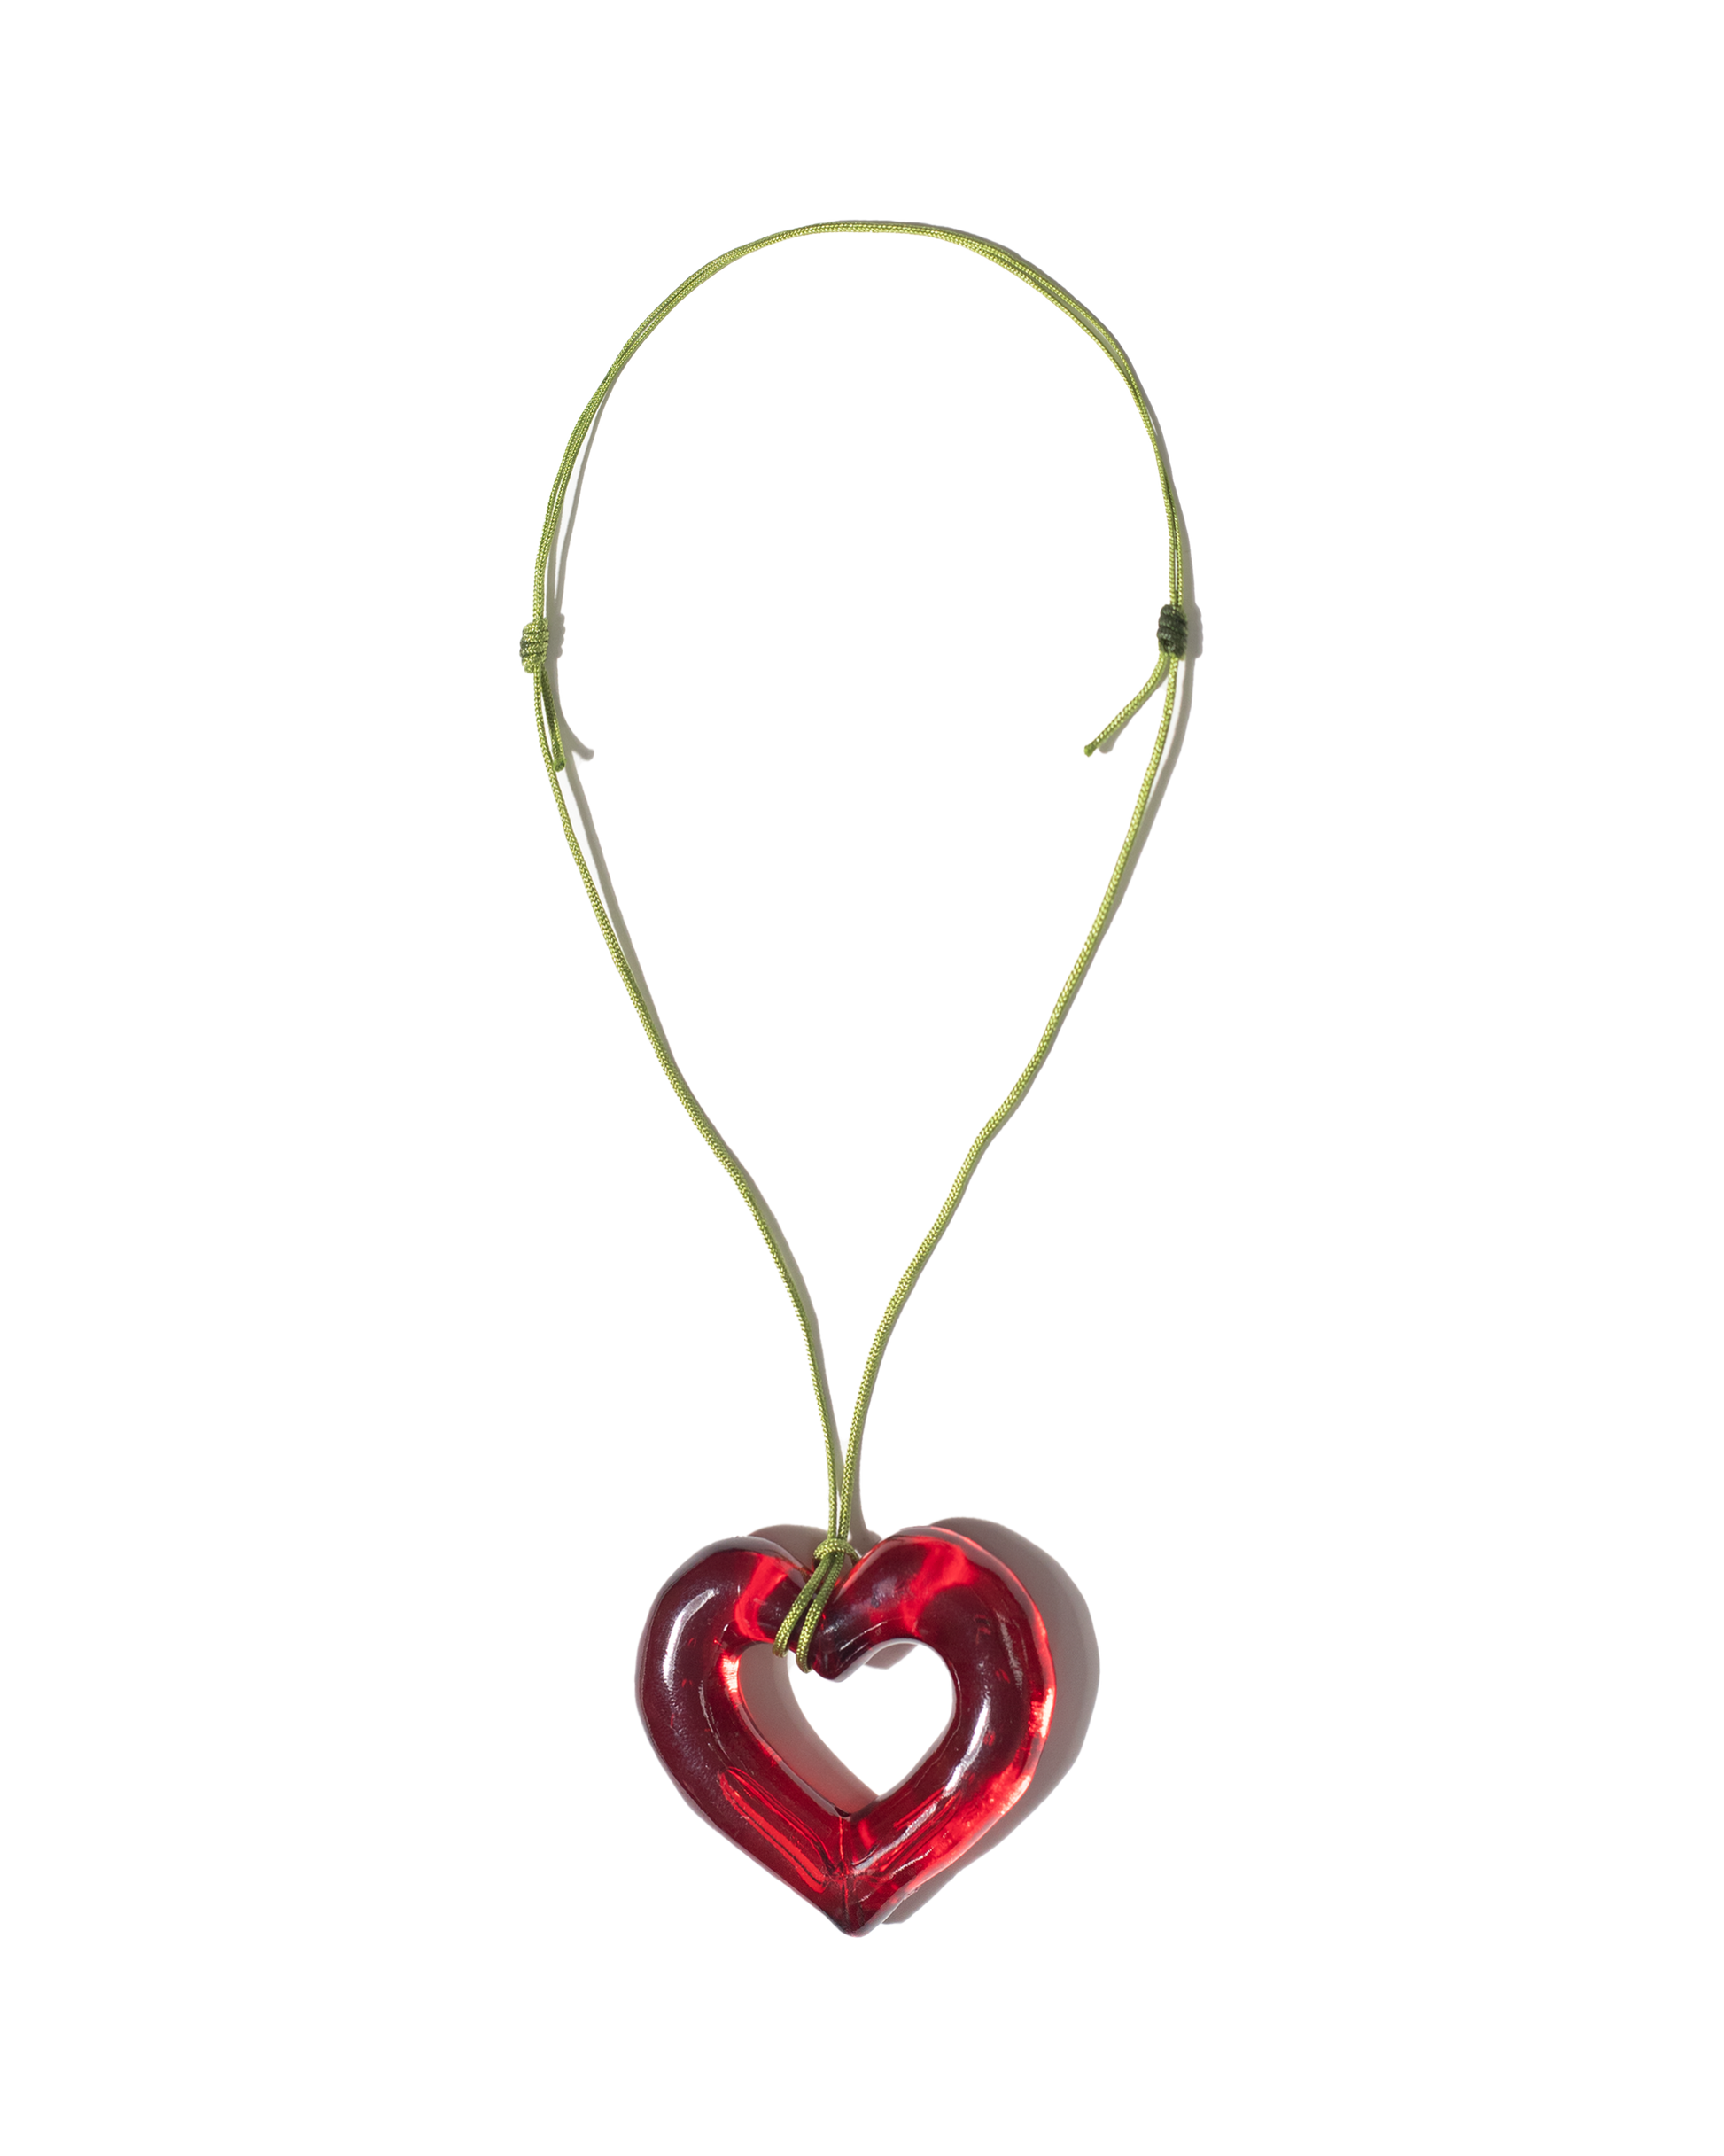 dark red resin heart pendant with green necklace string | Love U Pendant Red | Baobei Label